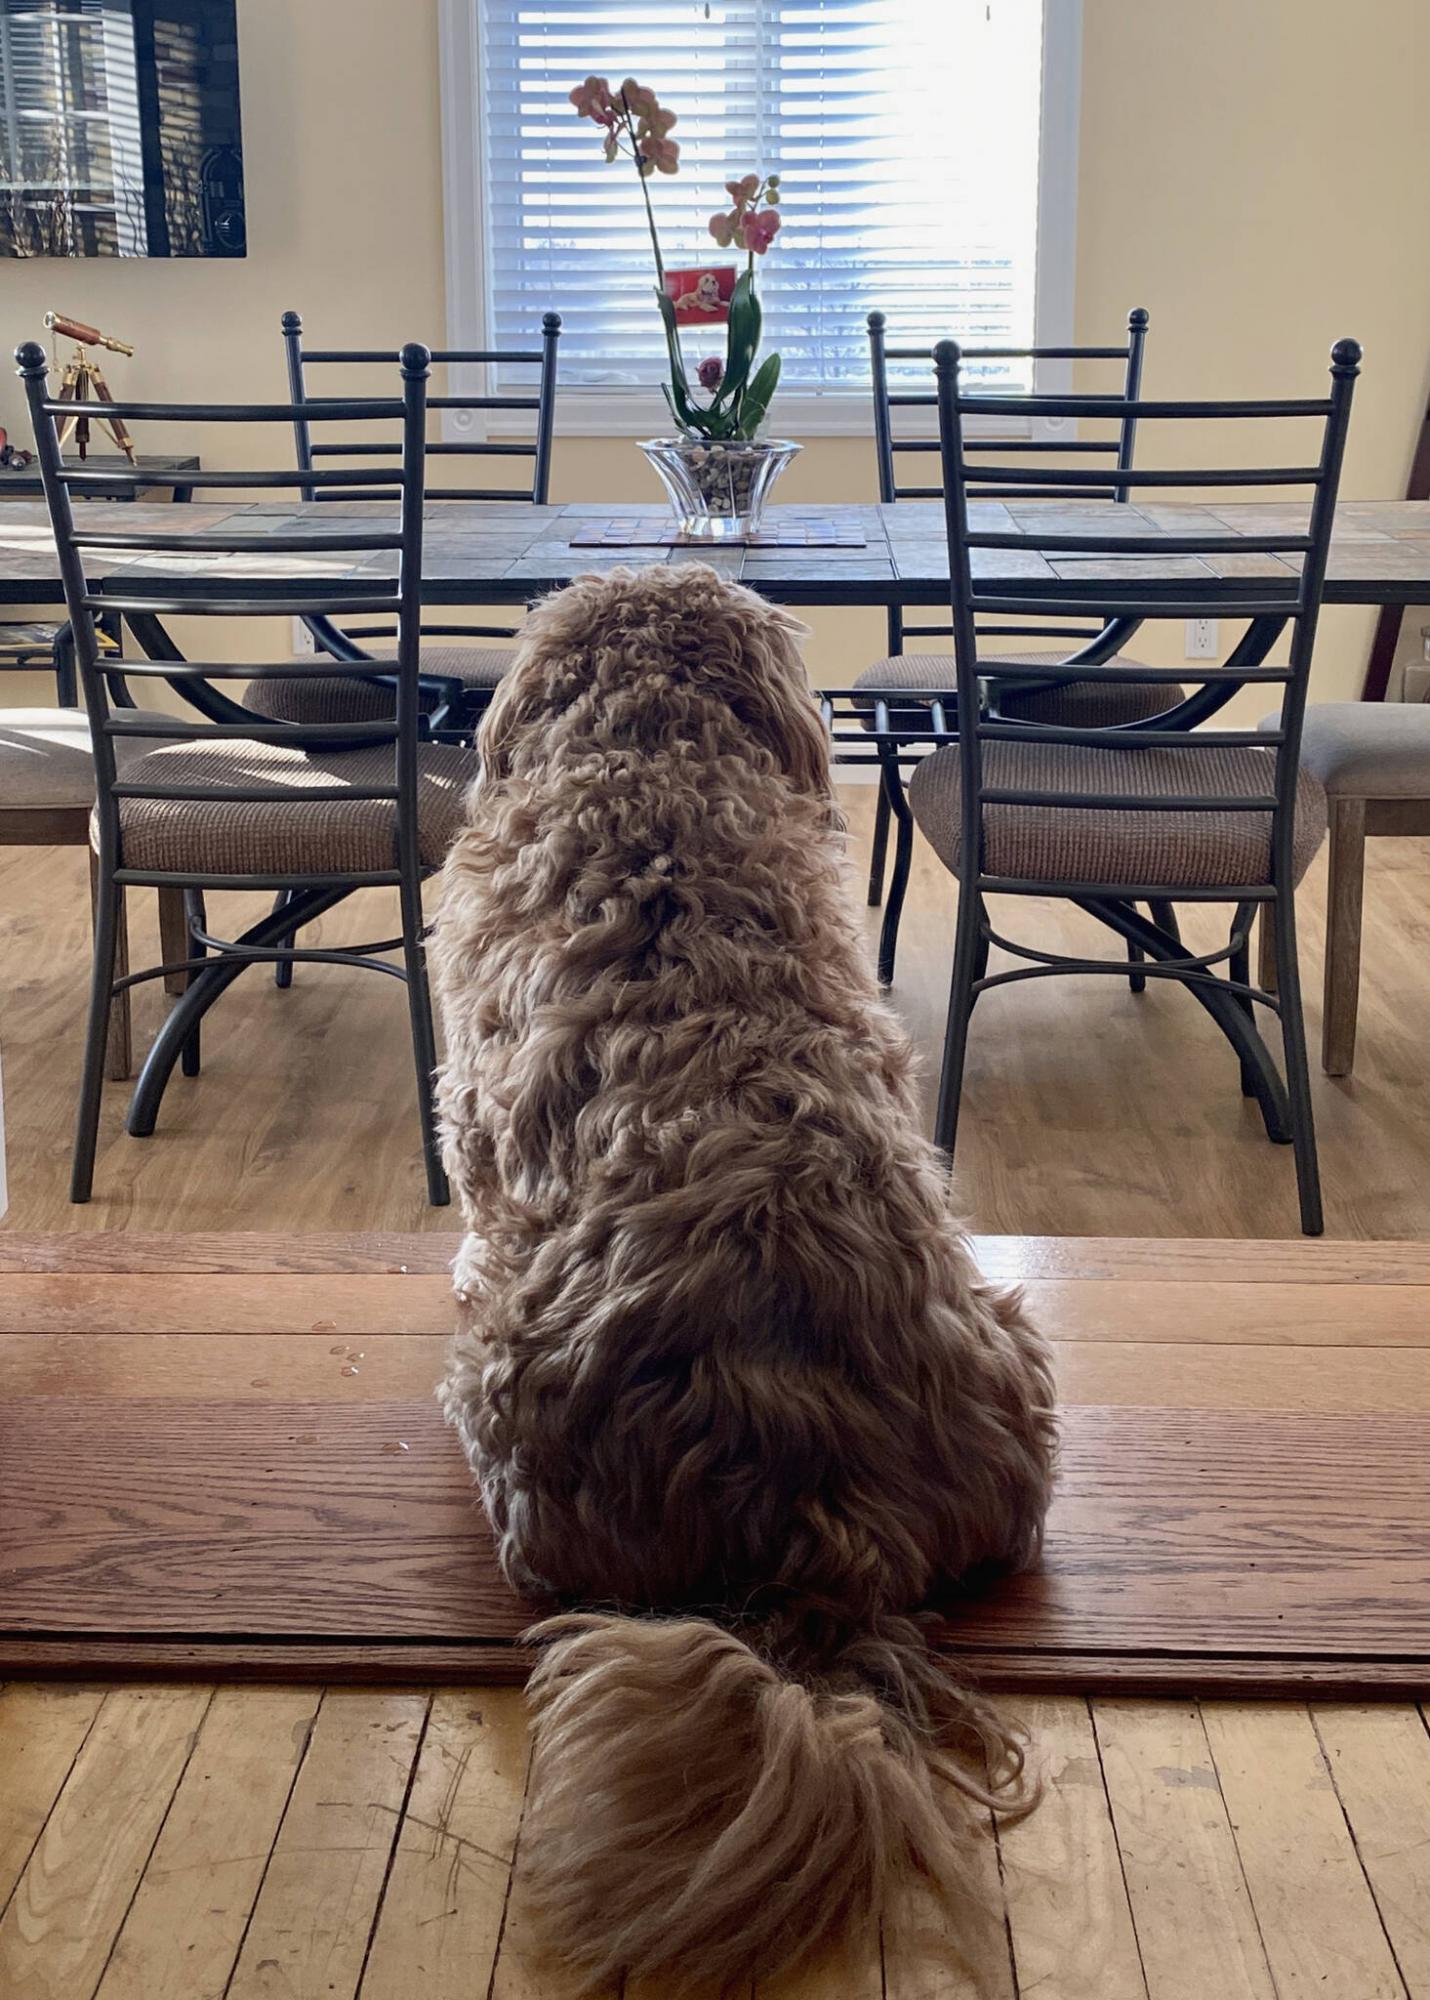 <p>Marc LaBossiere / Winnipeg Free Press</p><p>Milo looking in the direction of Molly&rsquo;s photo and flowers.</p>